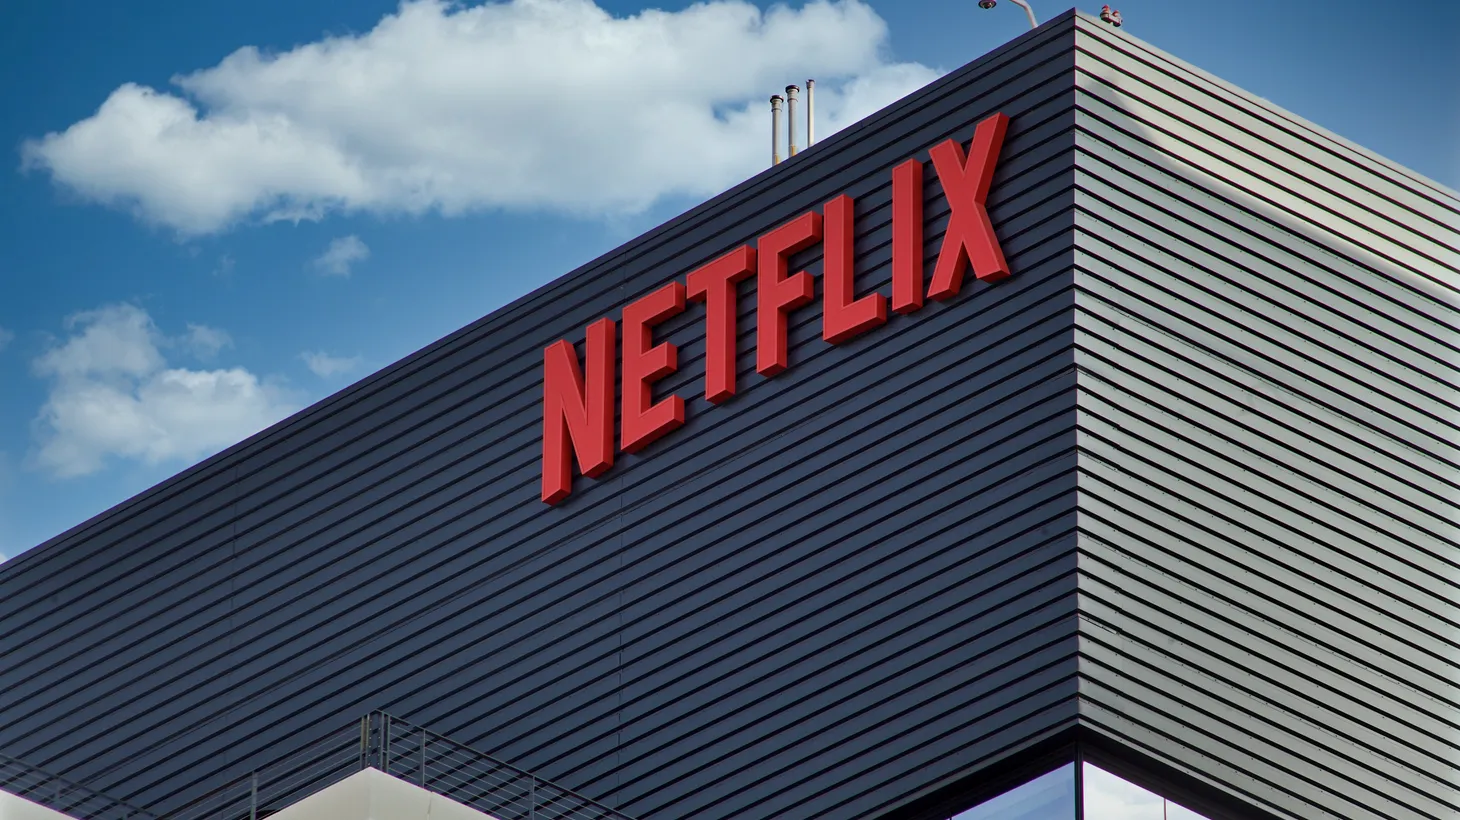 “Netflix is morphing,” says Kim Masters. “I think they are going to make fewer movies, they're going to have to cut that [spending], whether they want to admit it or not.”